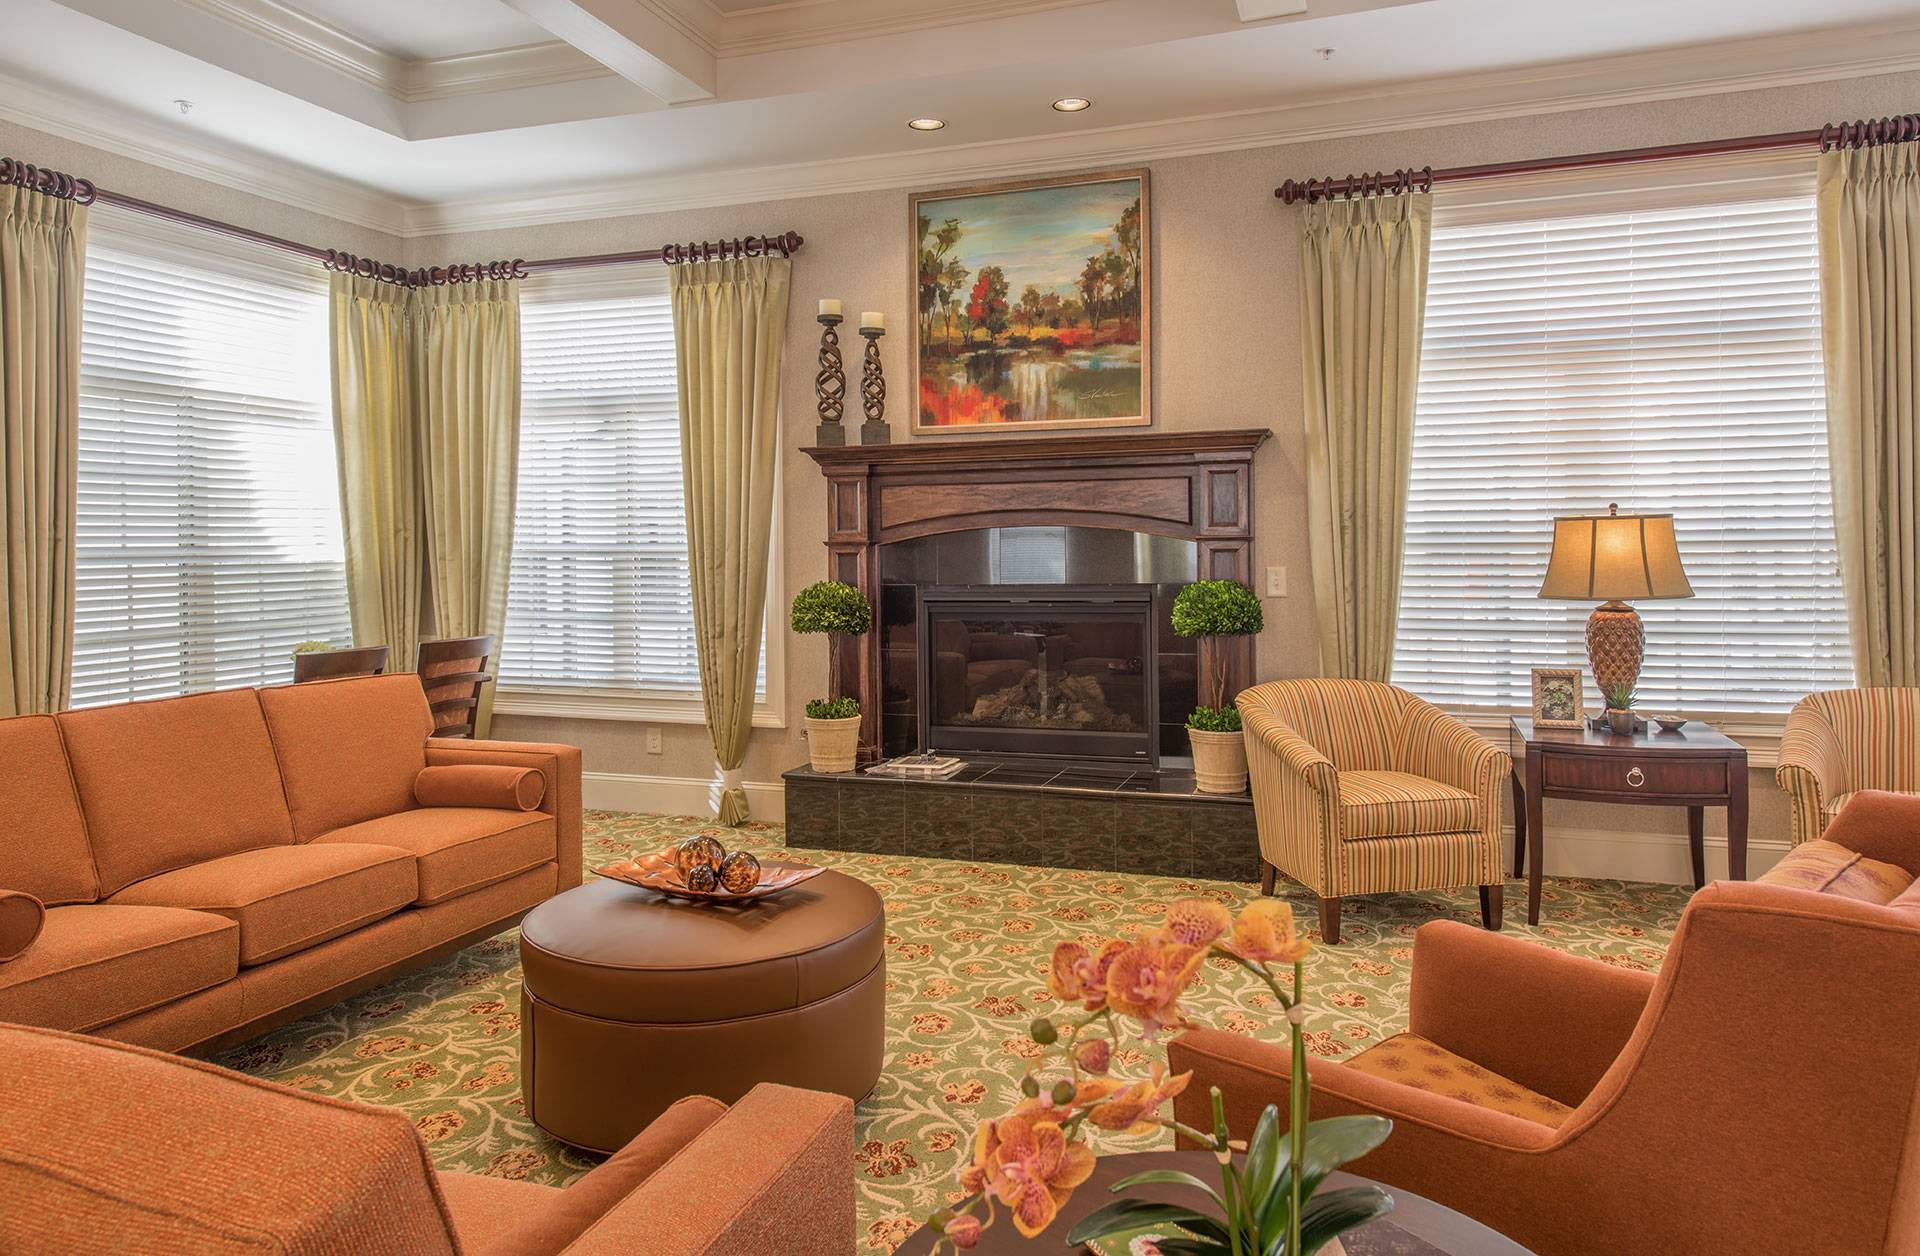 Senior Living Apartments for Couples in Oviedo